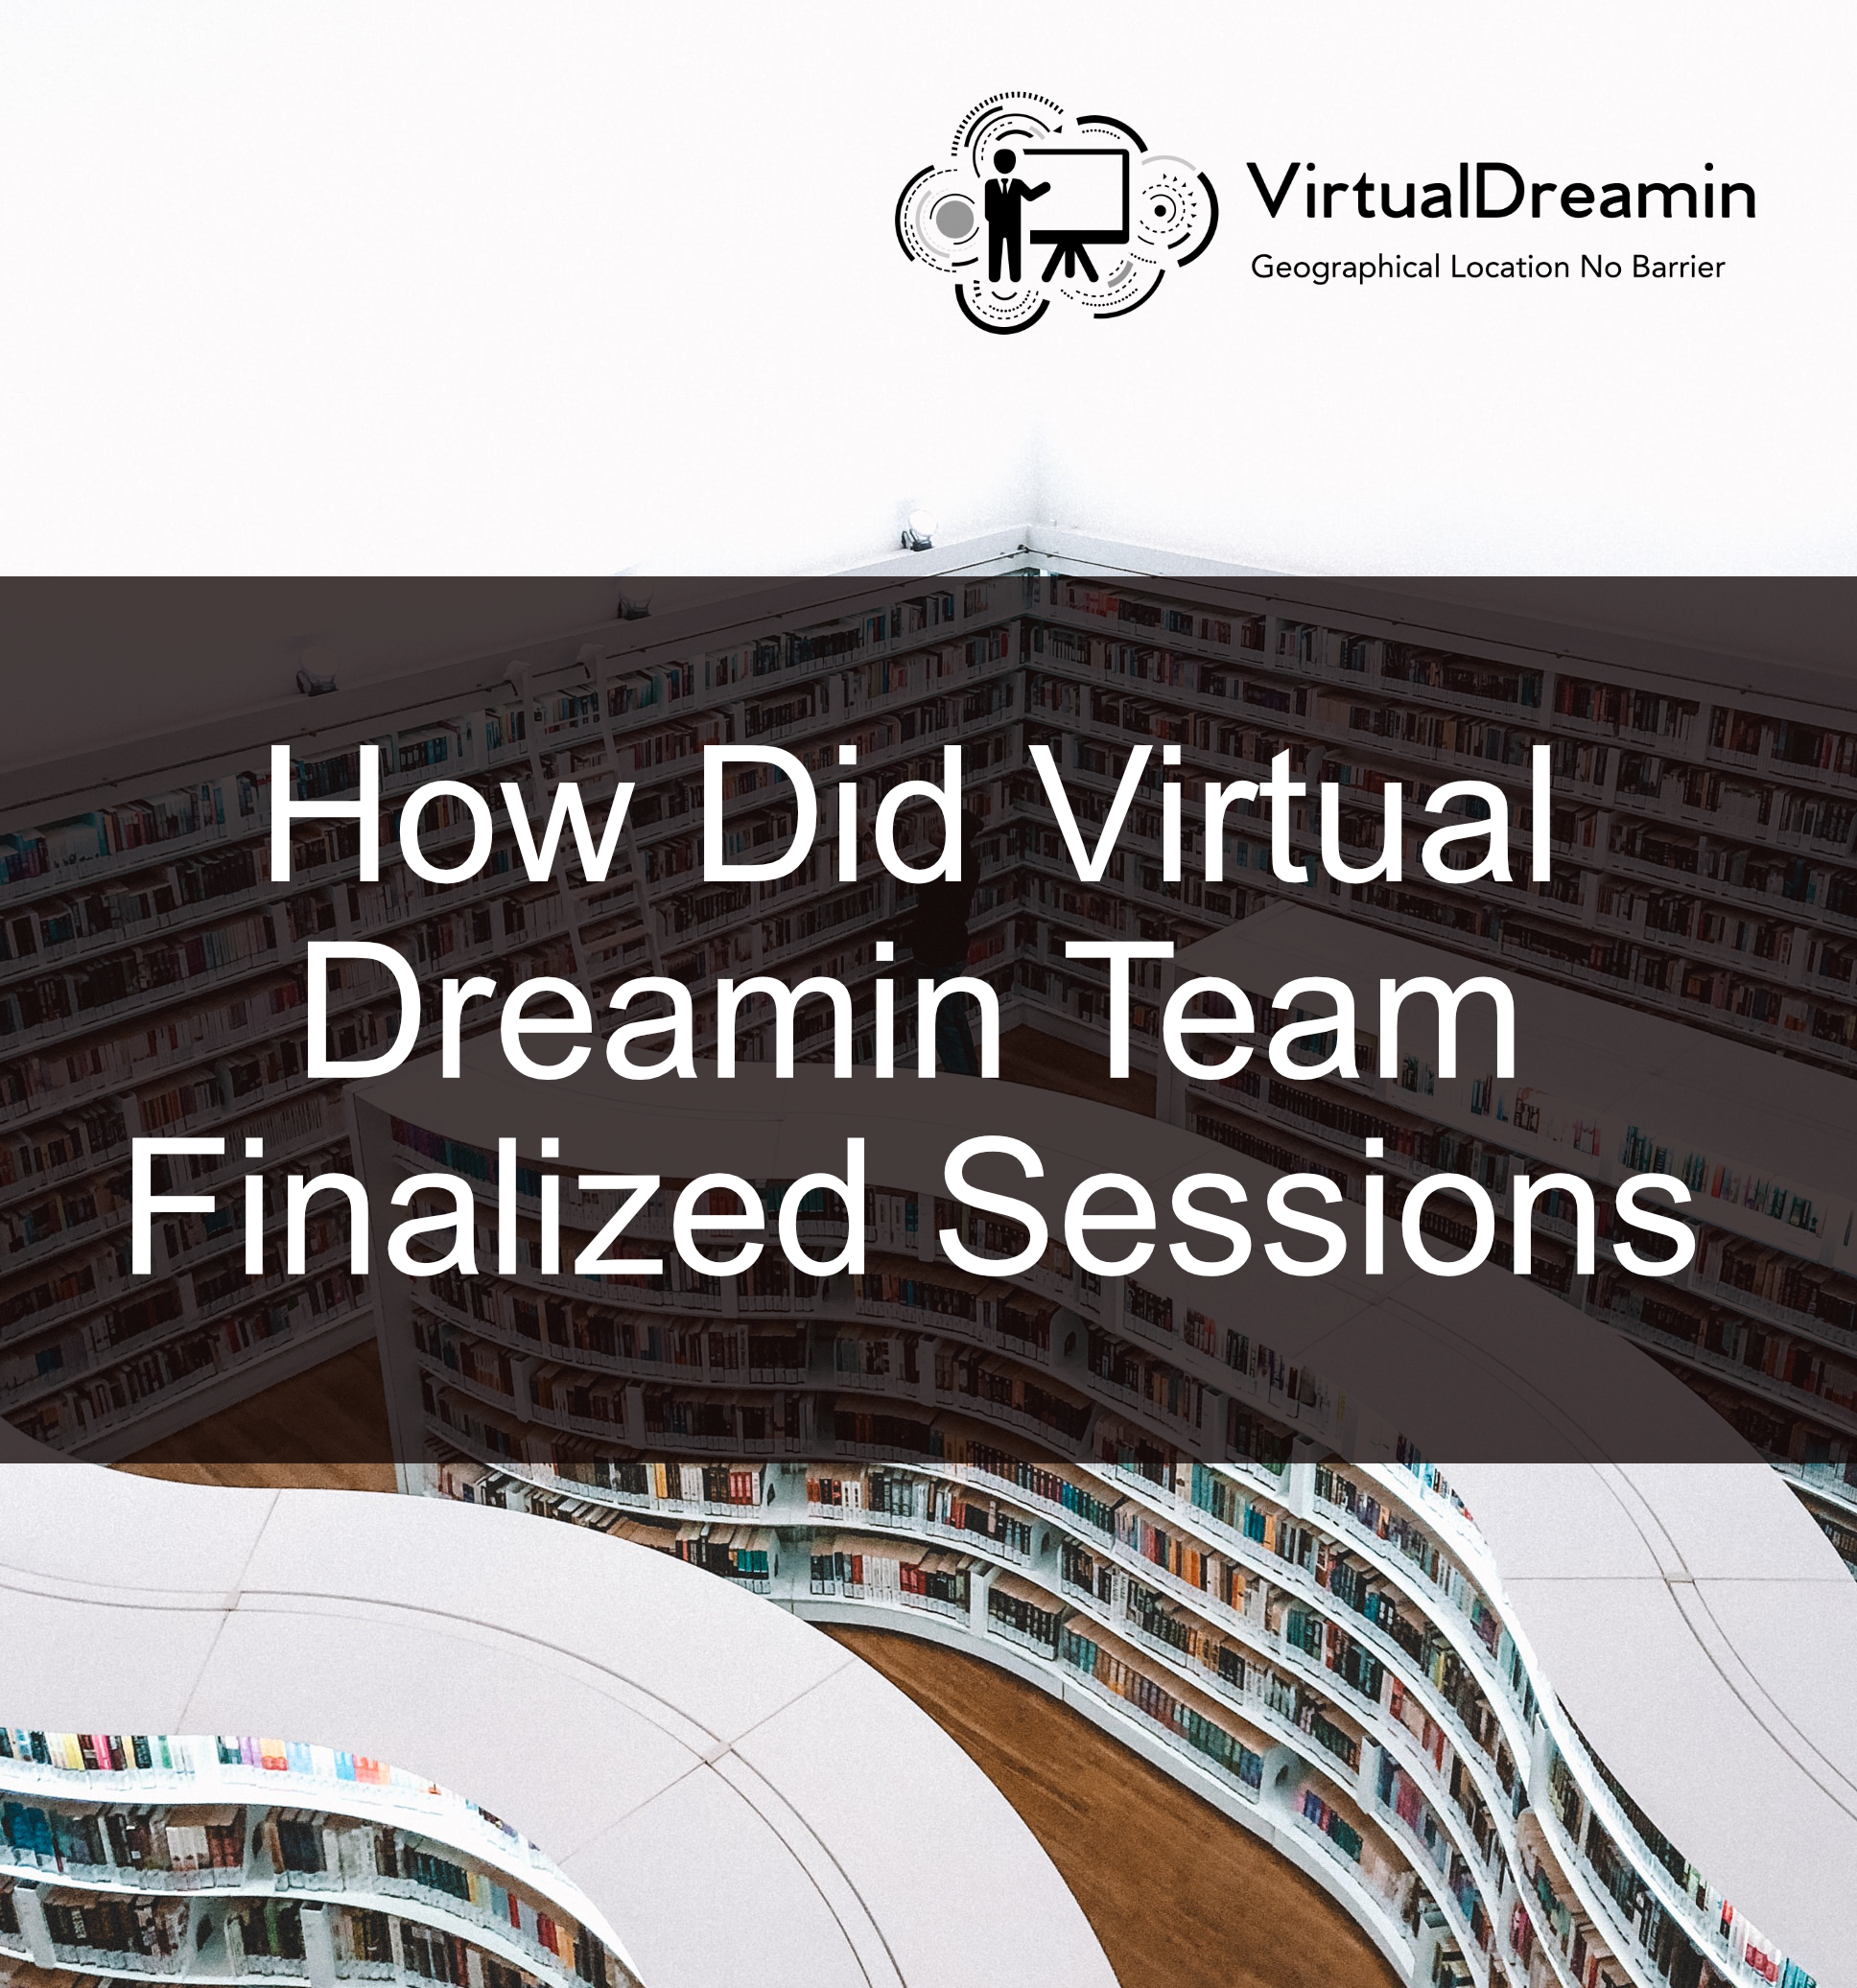 How Virtual Dreamin Finalized Sessions